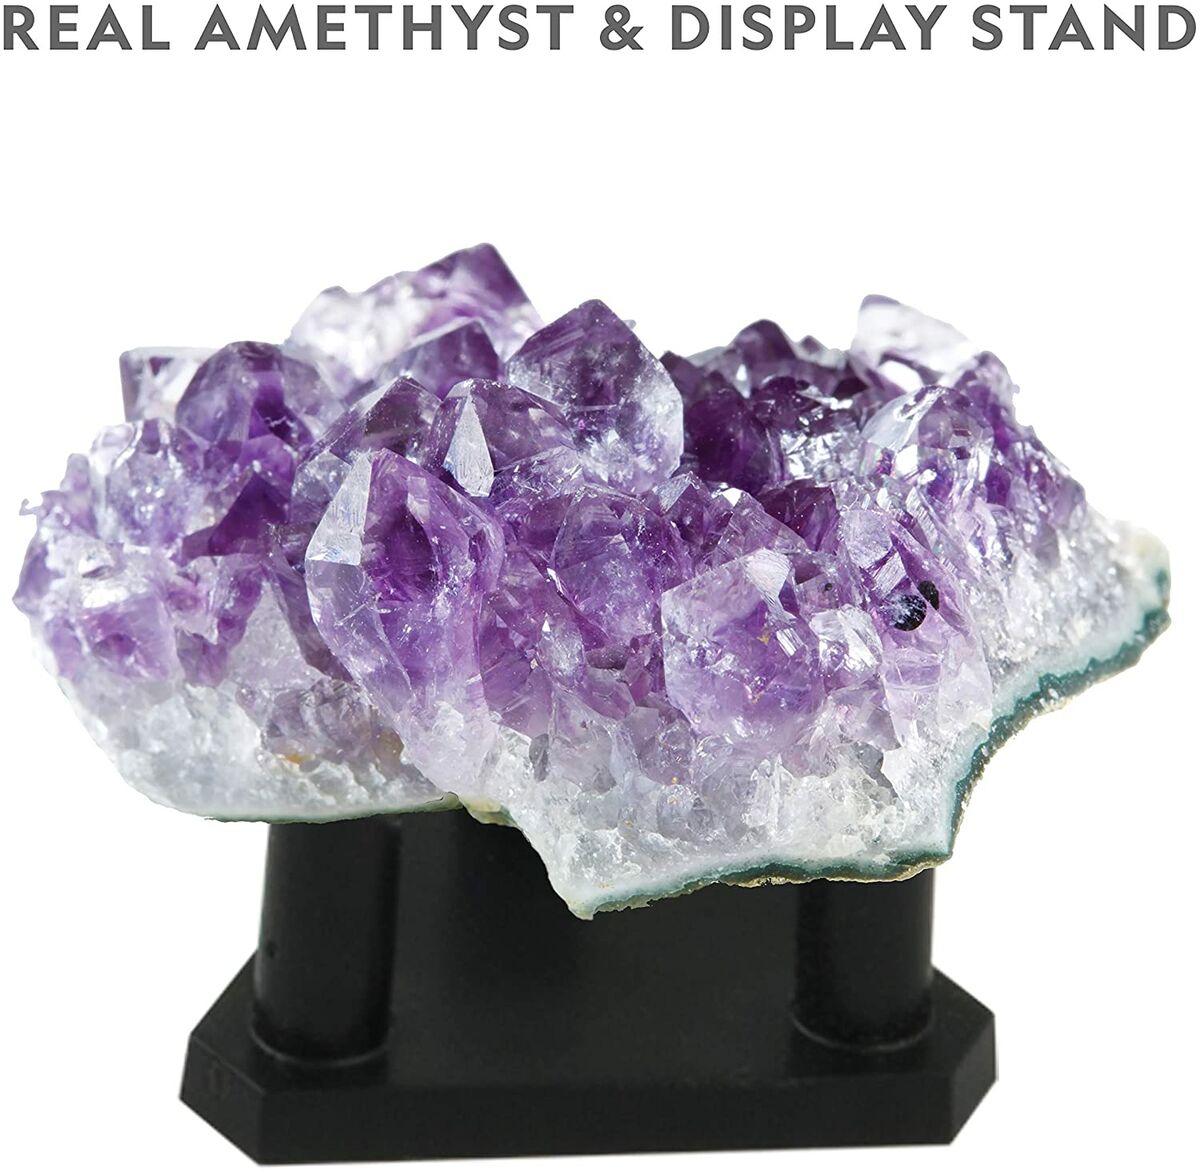 National Geography Purple Crystal Growing Lab